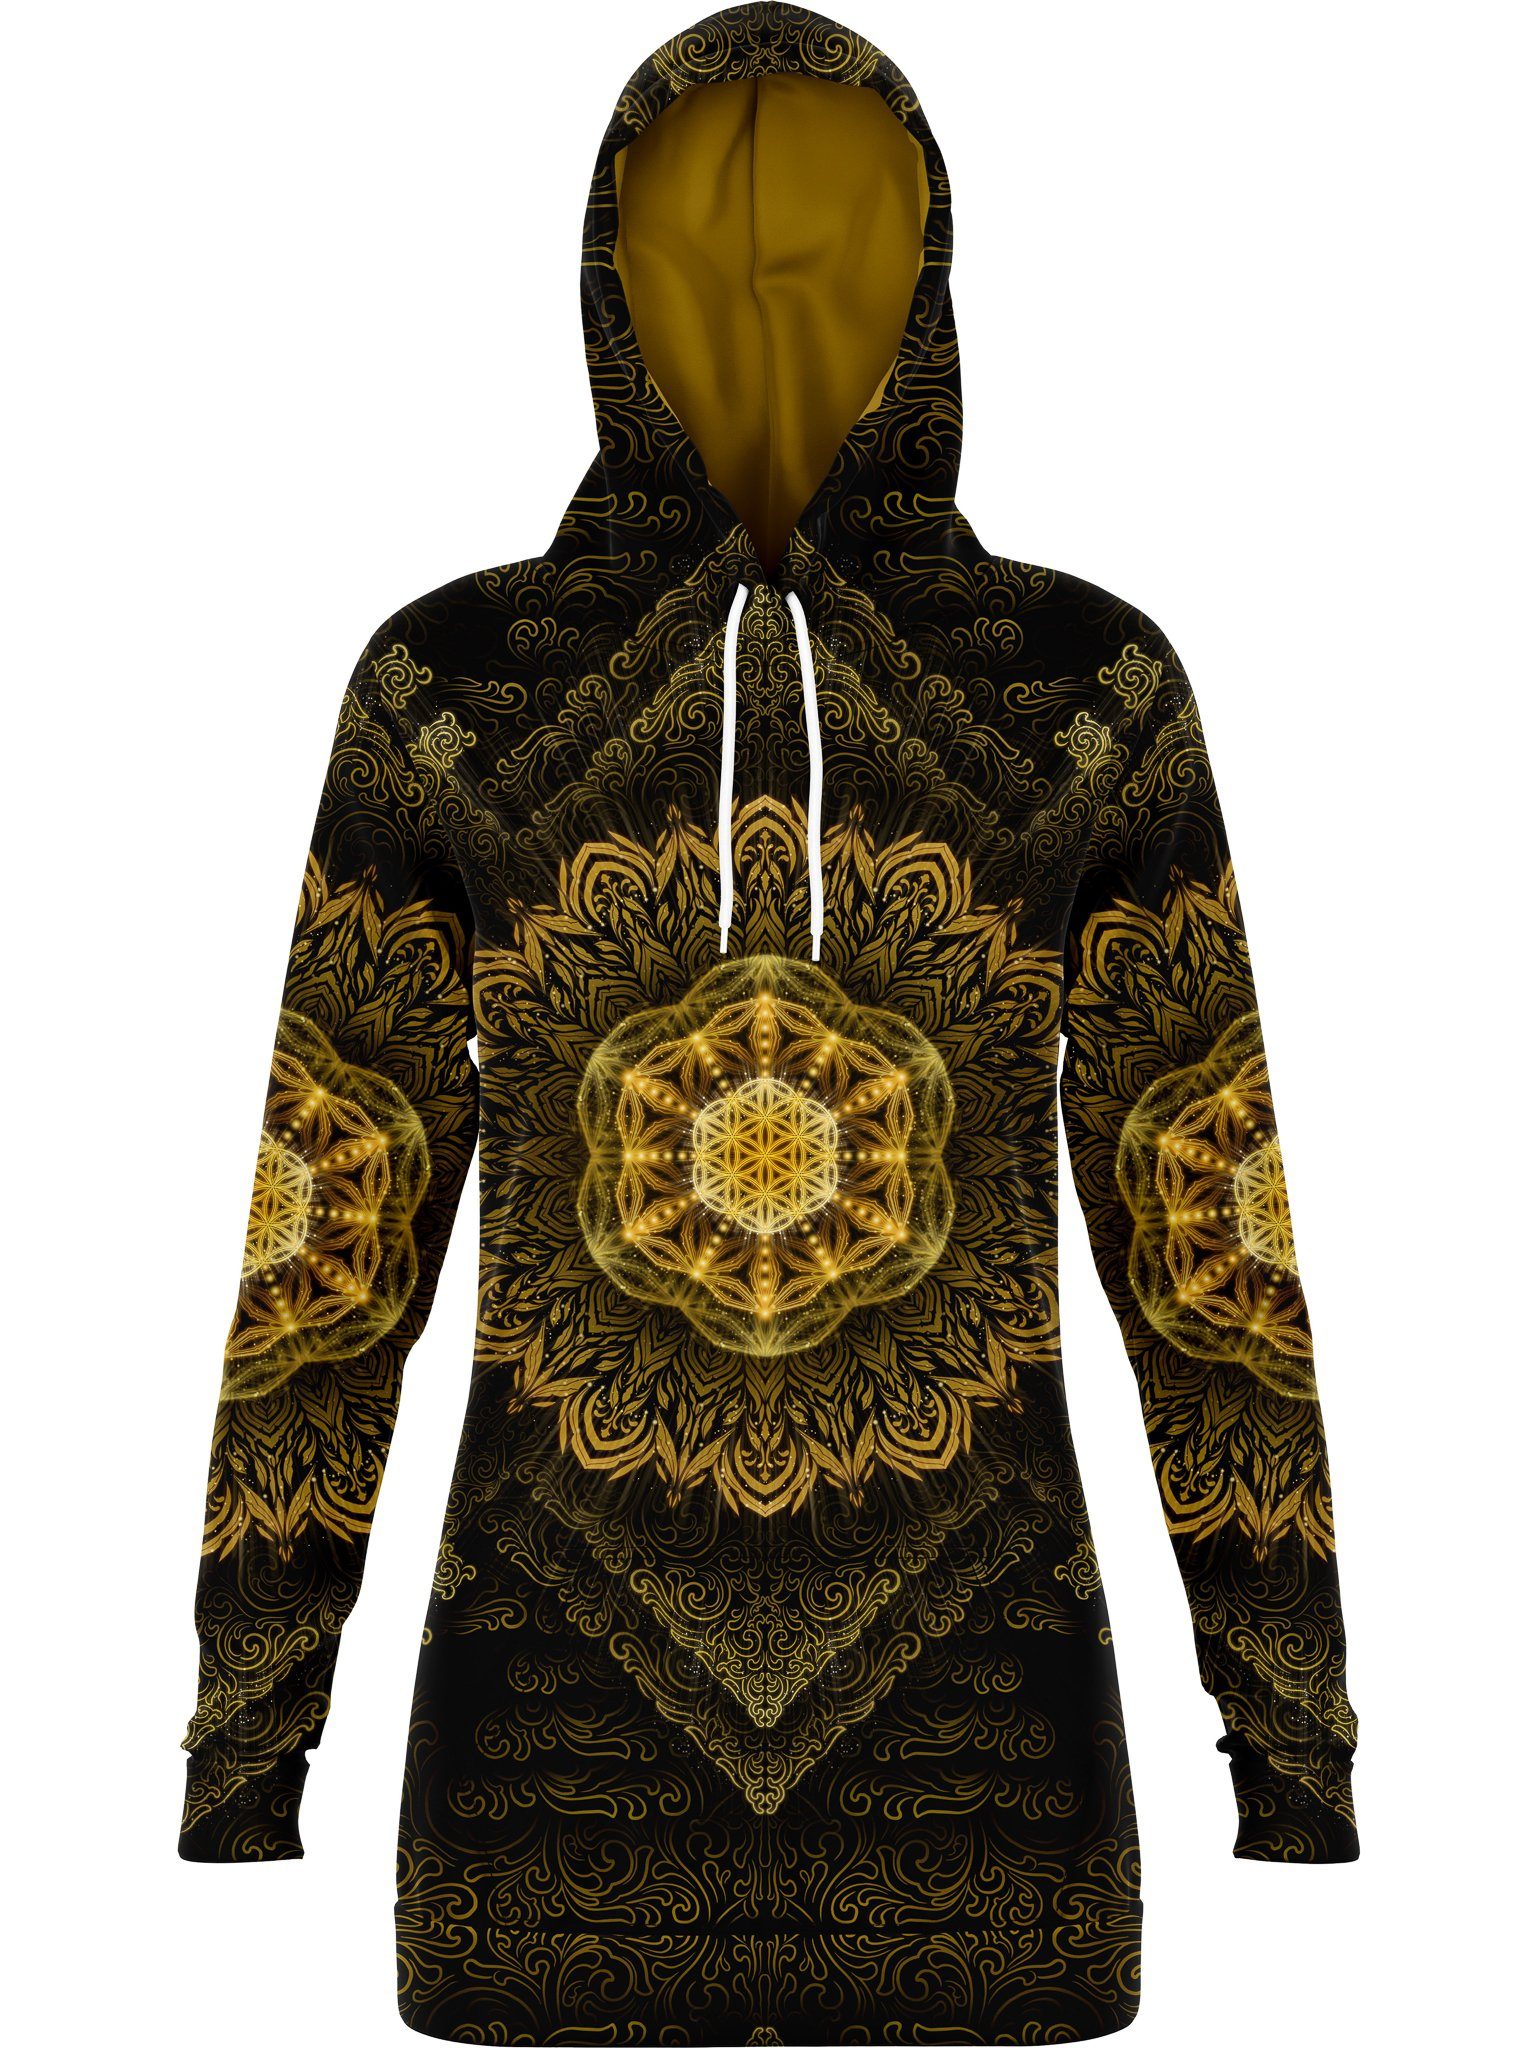 Galaxy 2.0 Hooded Dress l ElectroThreads - Electro Threads